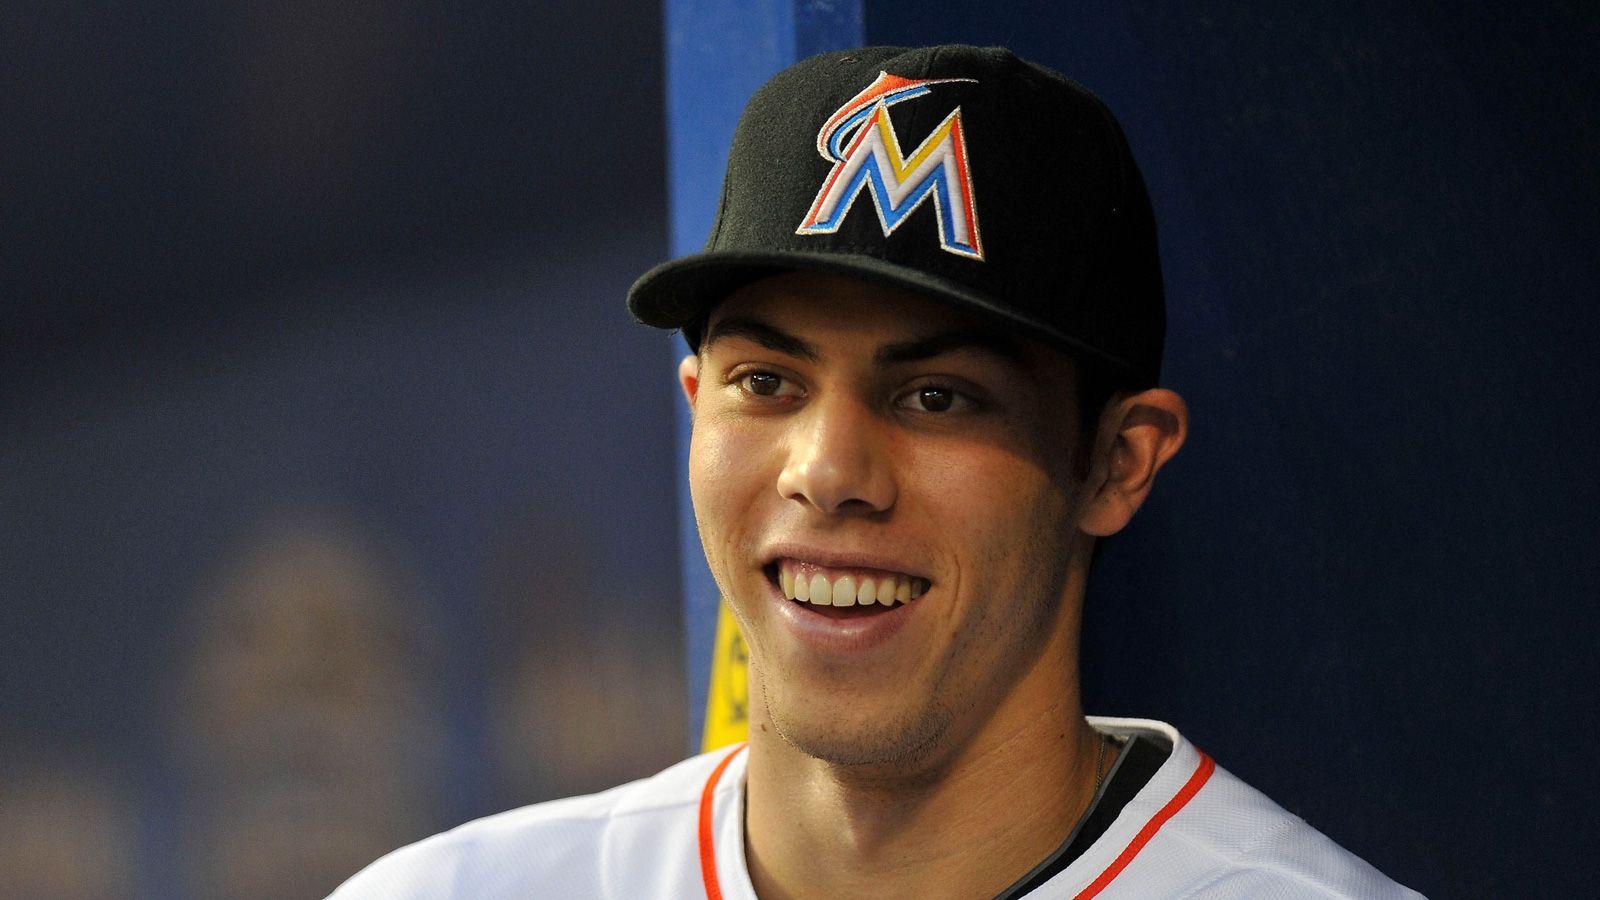 SQ Exclusive Interview: Marlins LF, Christian Yelich